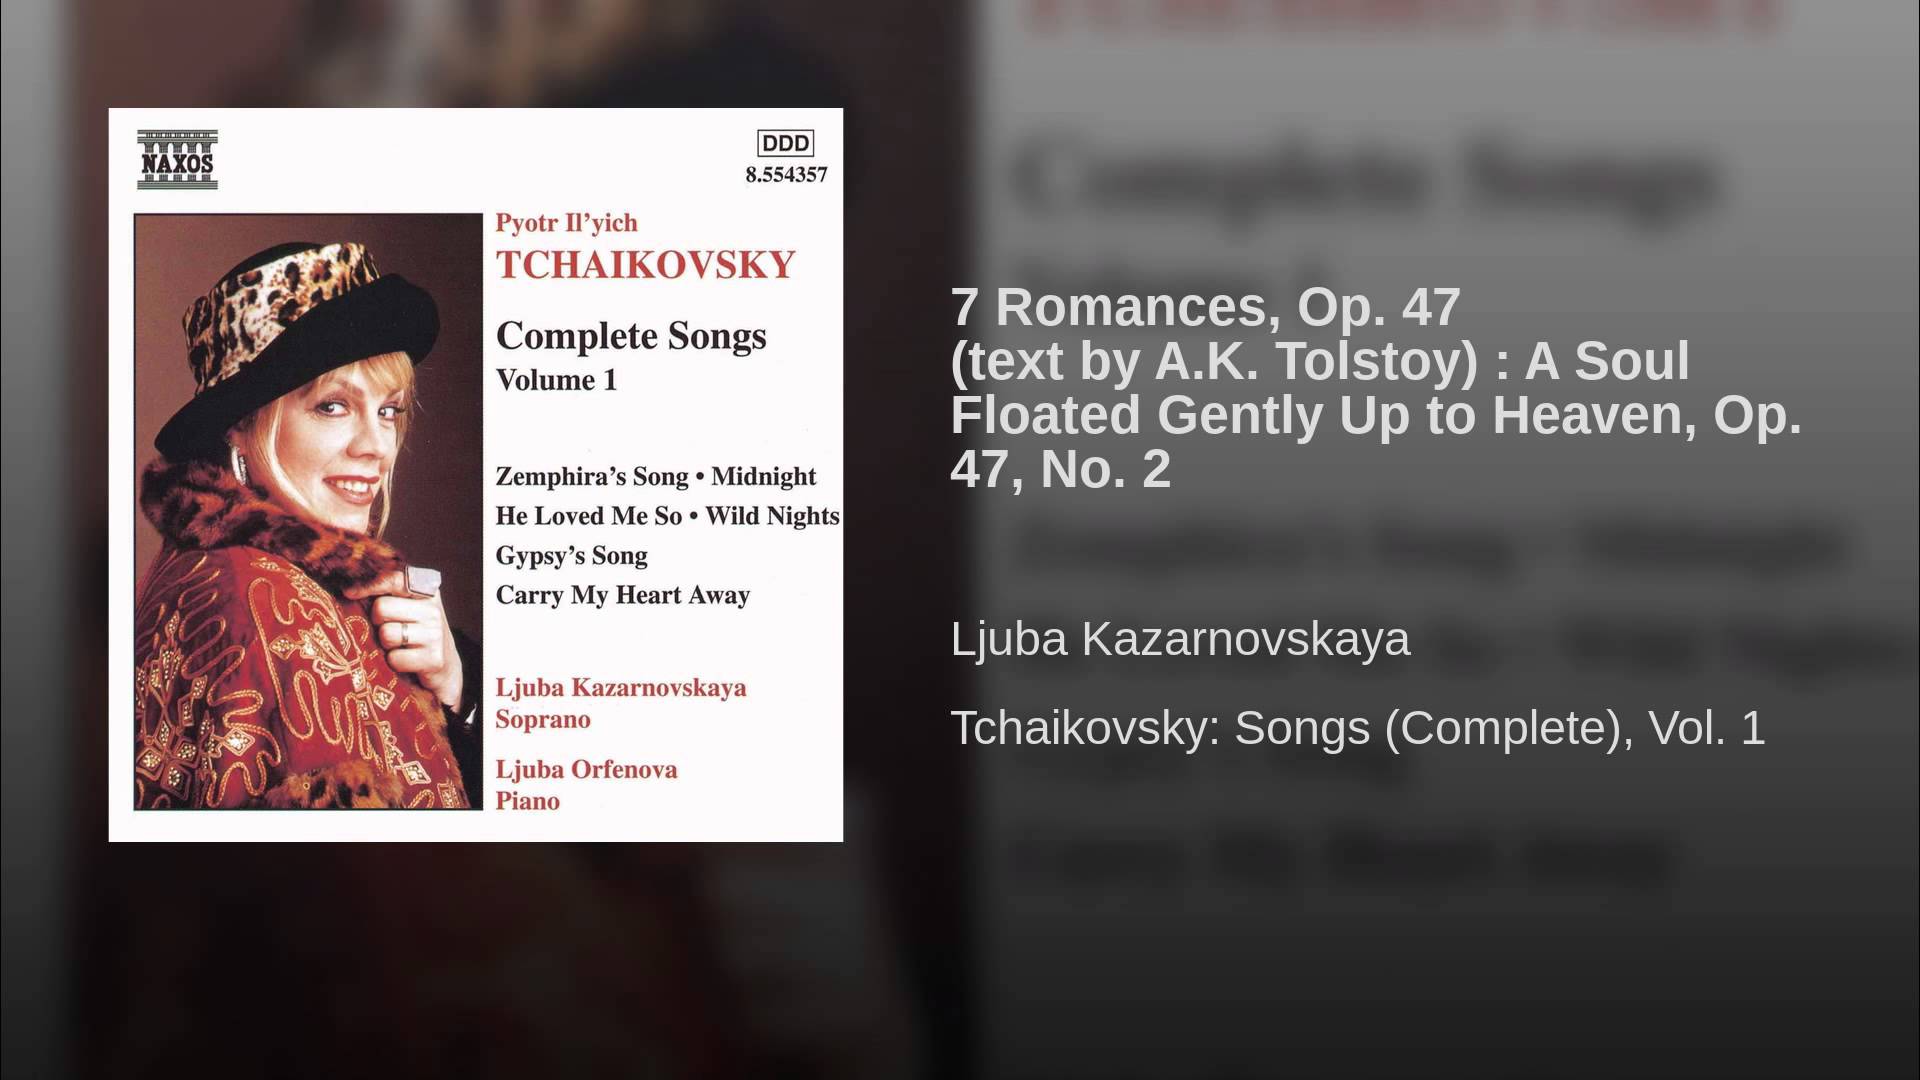 Tchaikovsky:  Gently the soul ascended to heaven